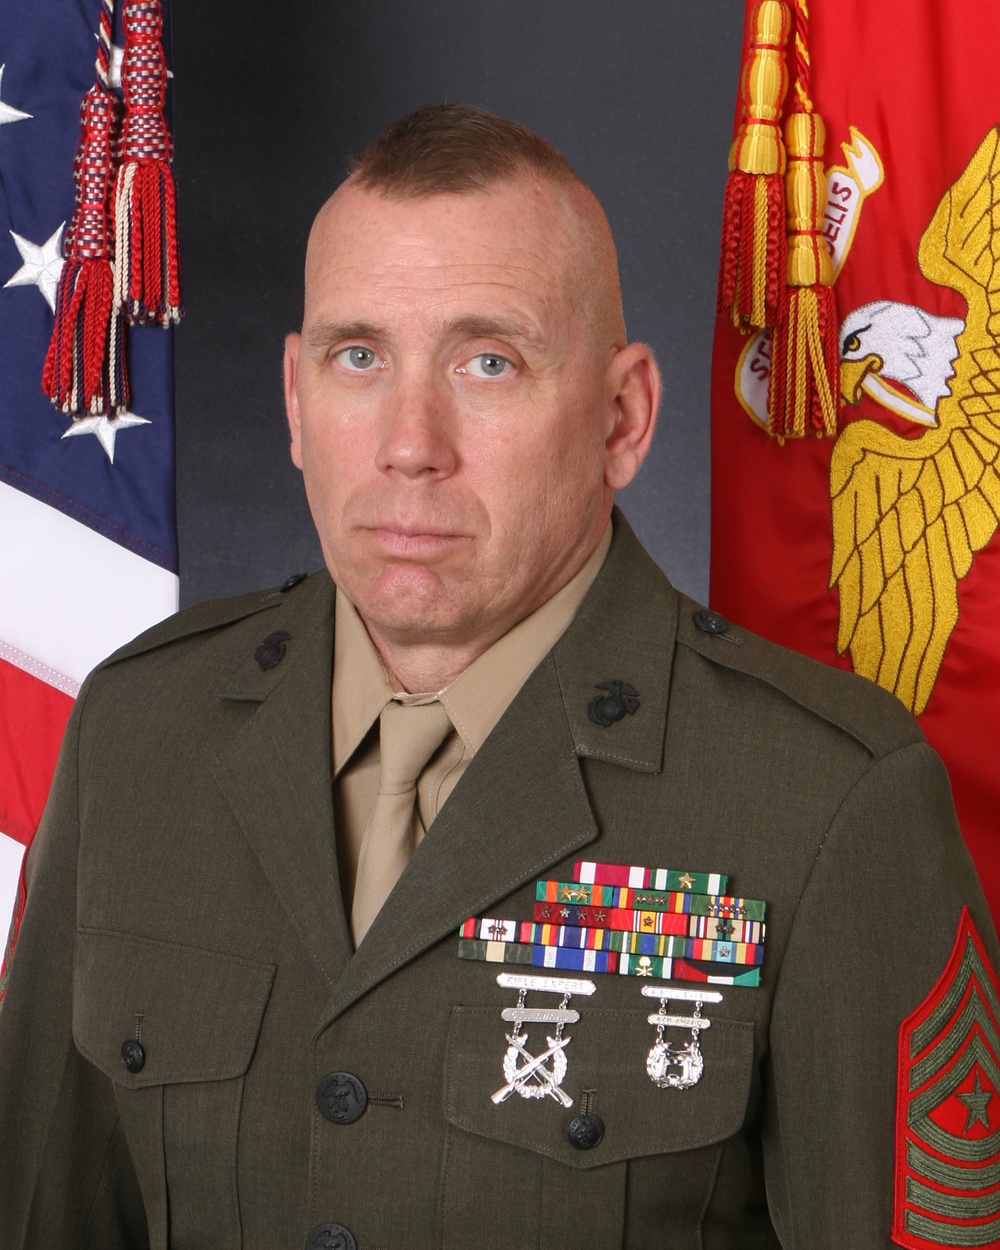 Campbell welcomed as ‘271 sergeant major